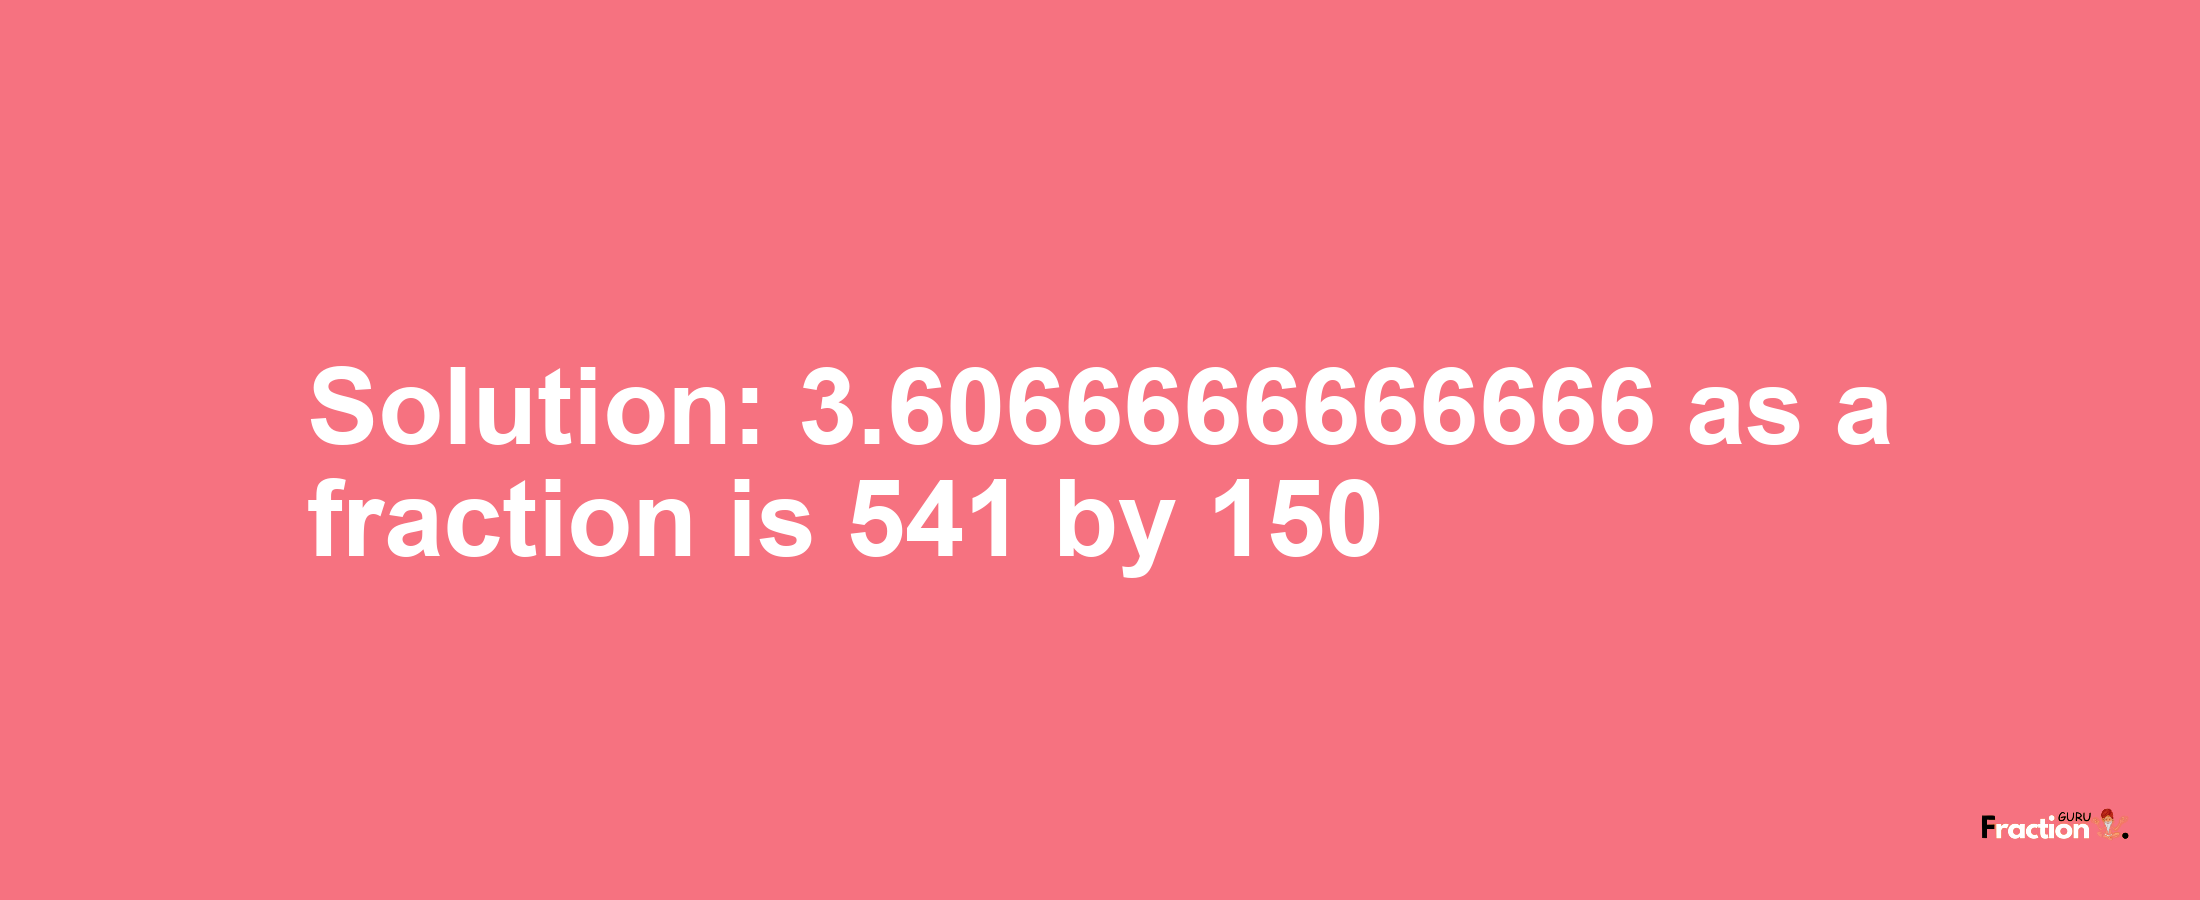 Solution:3.6066666666666 as a fraction is 541/150